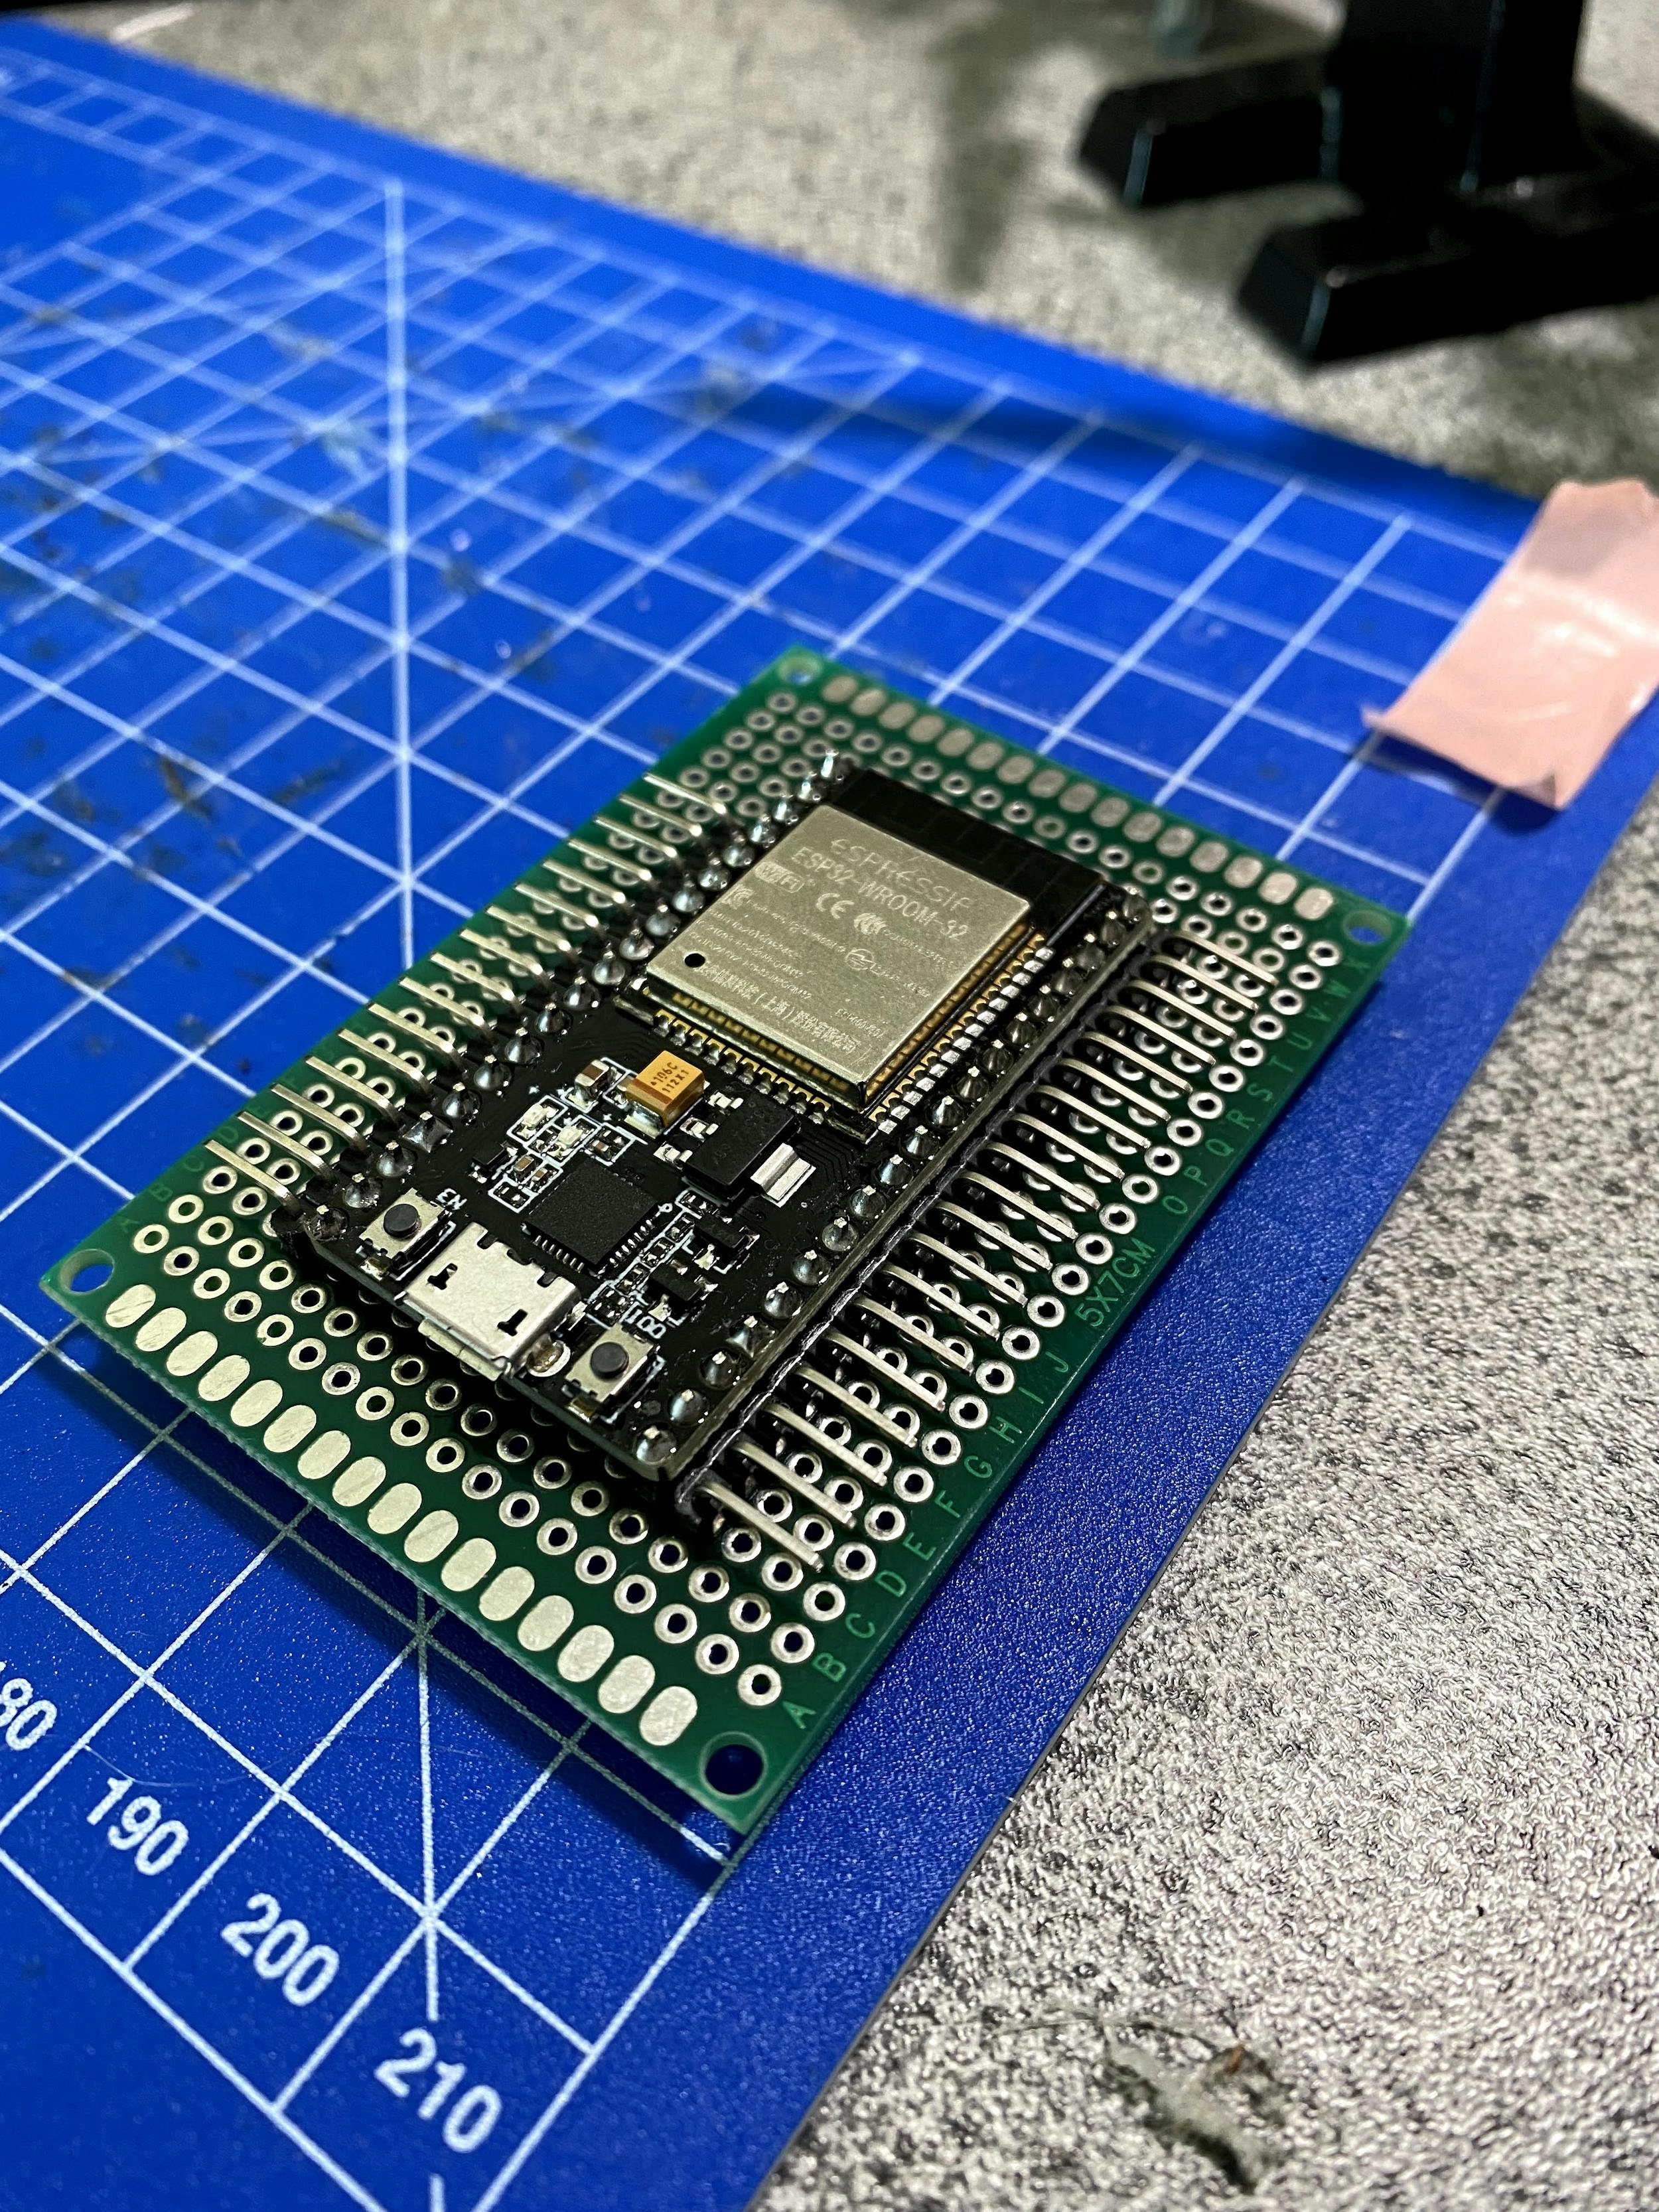 ESP32 soldered to protoboard with some male headers to connect inputs to.